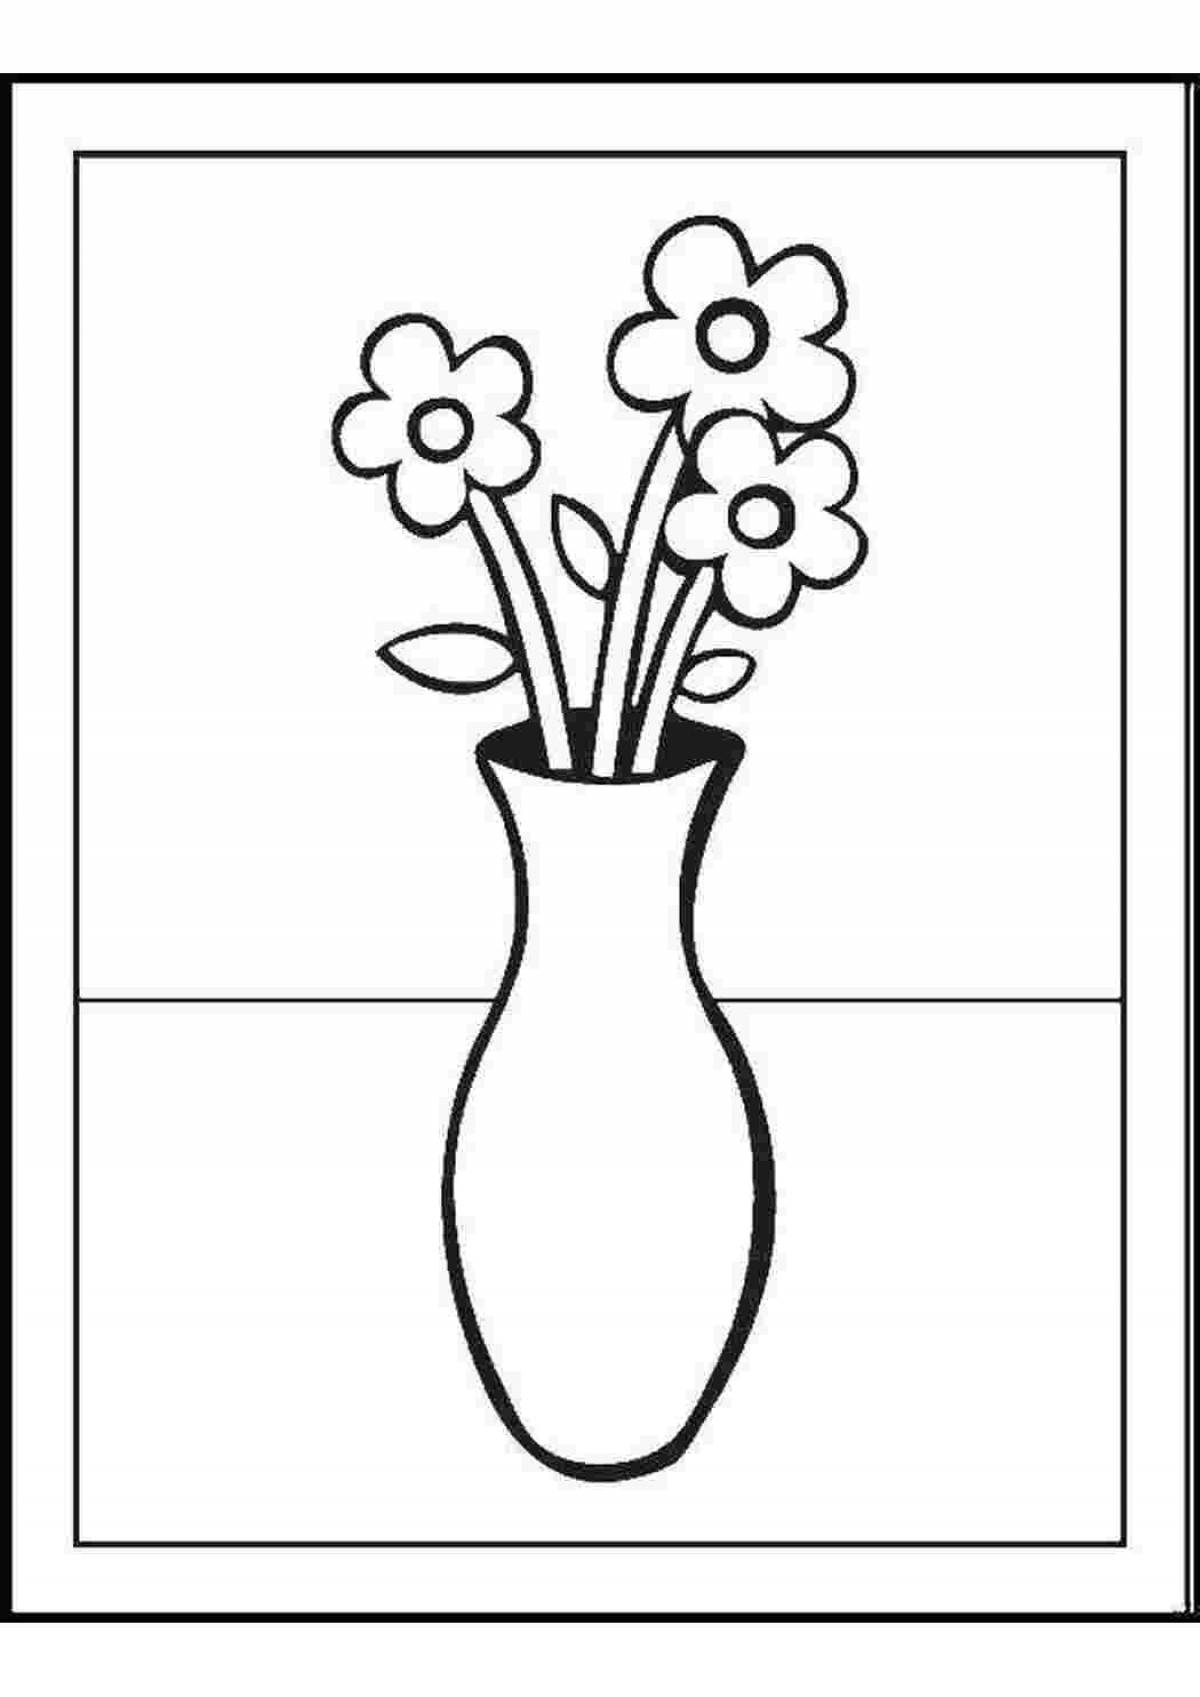 Great vase of flowers coloring book for kids